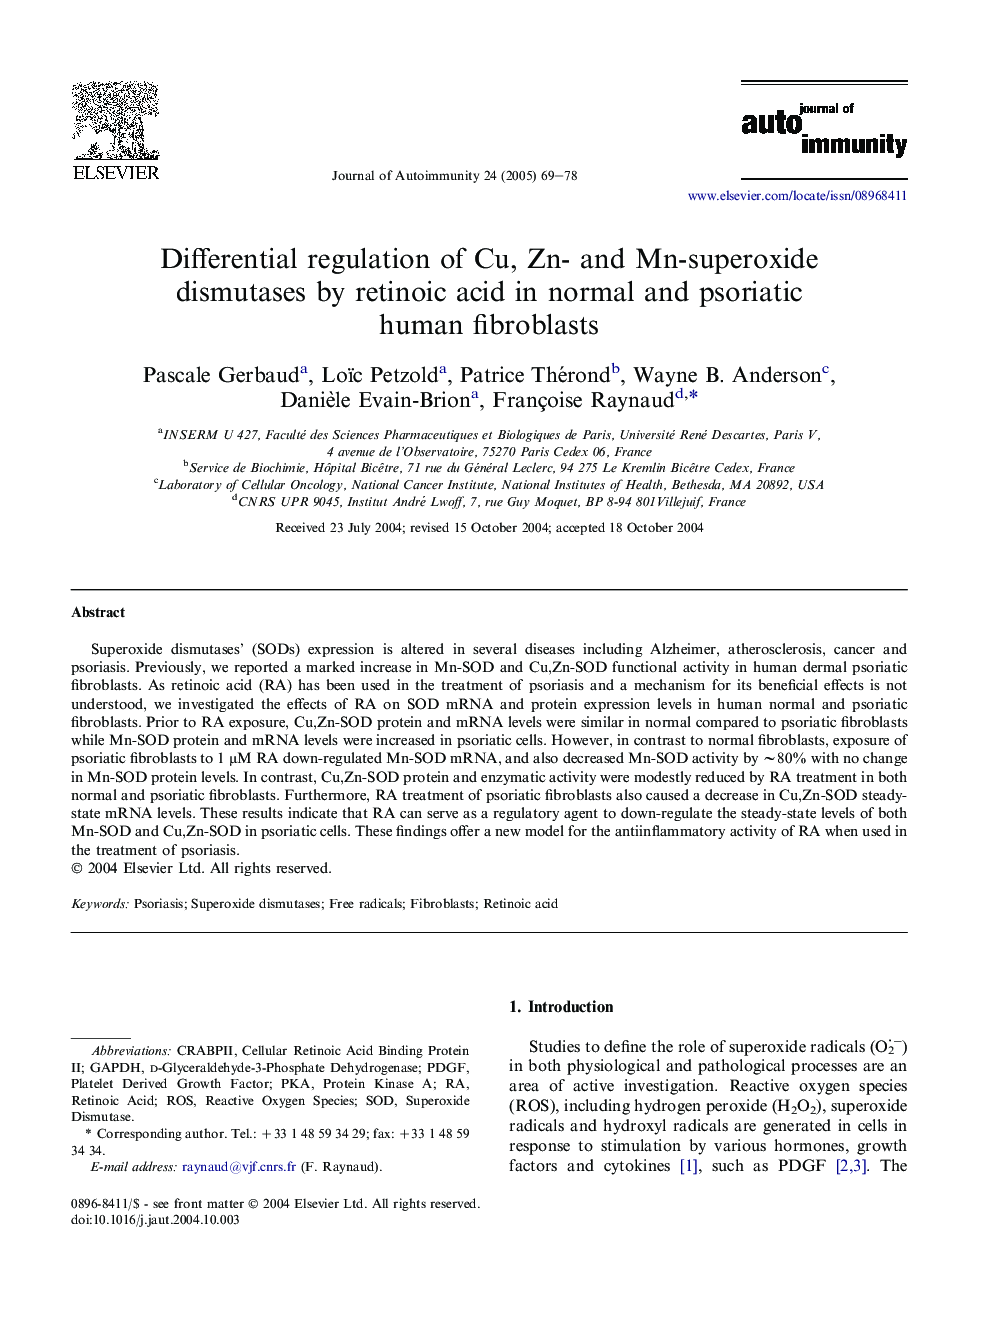 Differential regulation of Cu, Zn- and Mn-superoxide dismutases by retinoic acid in normal and psoriatic human fibroblasts